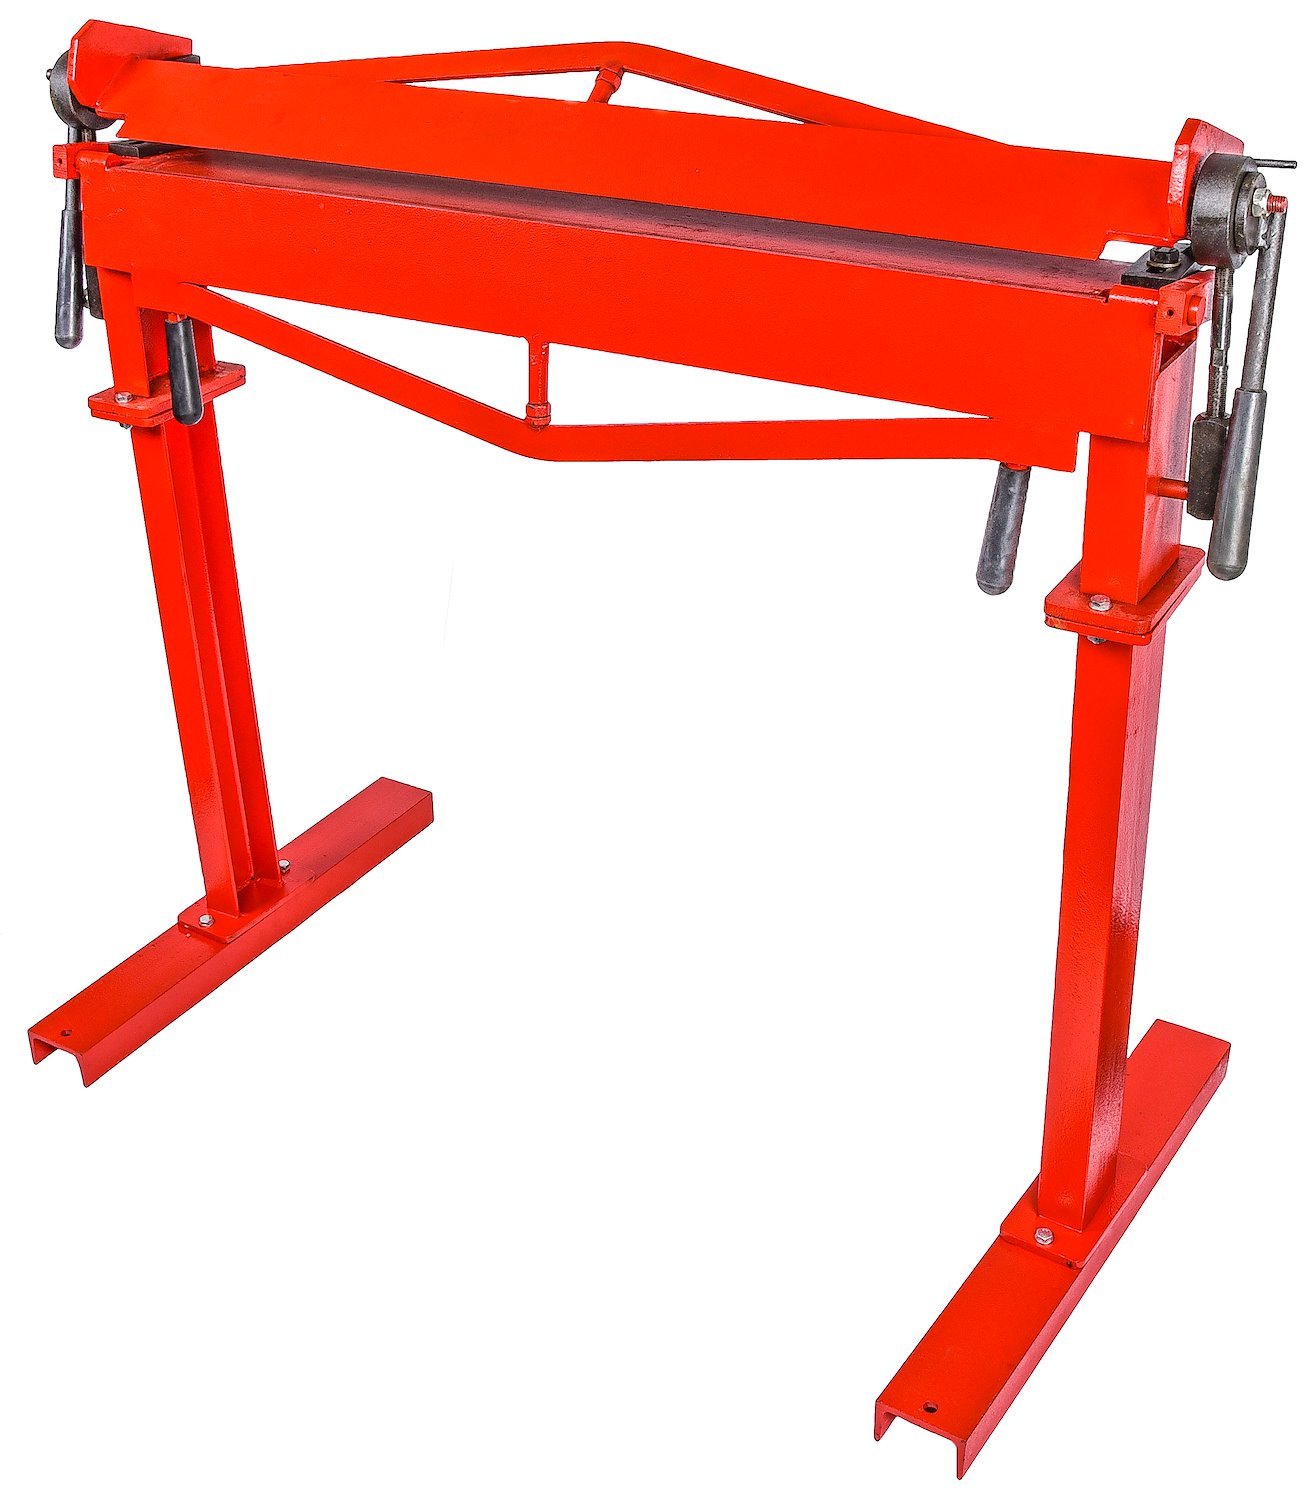 36" Sheet Metal Brake with a Stand